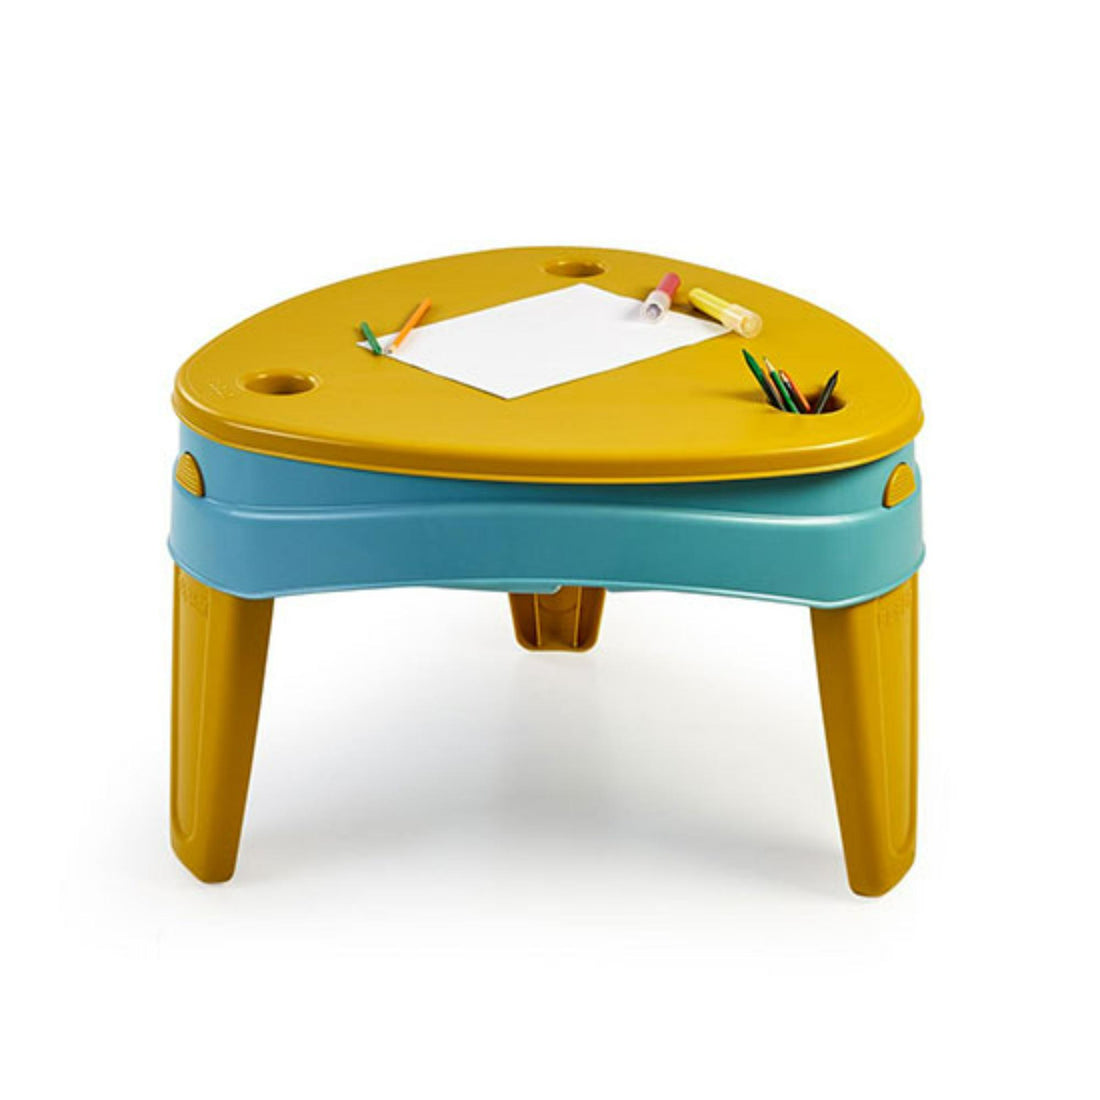 FEBER CASUAL PLAY TABLE